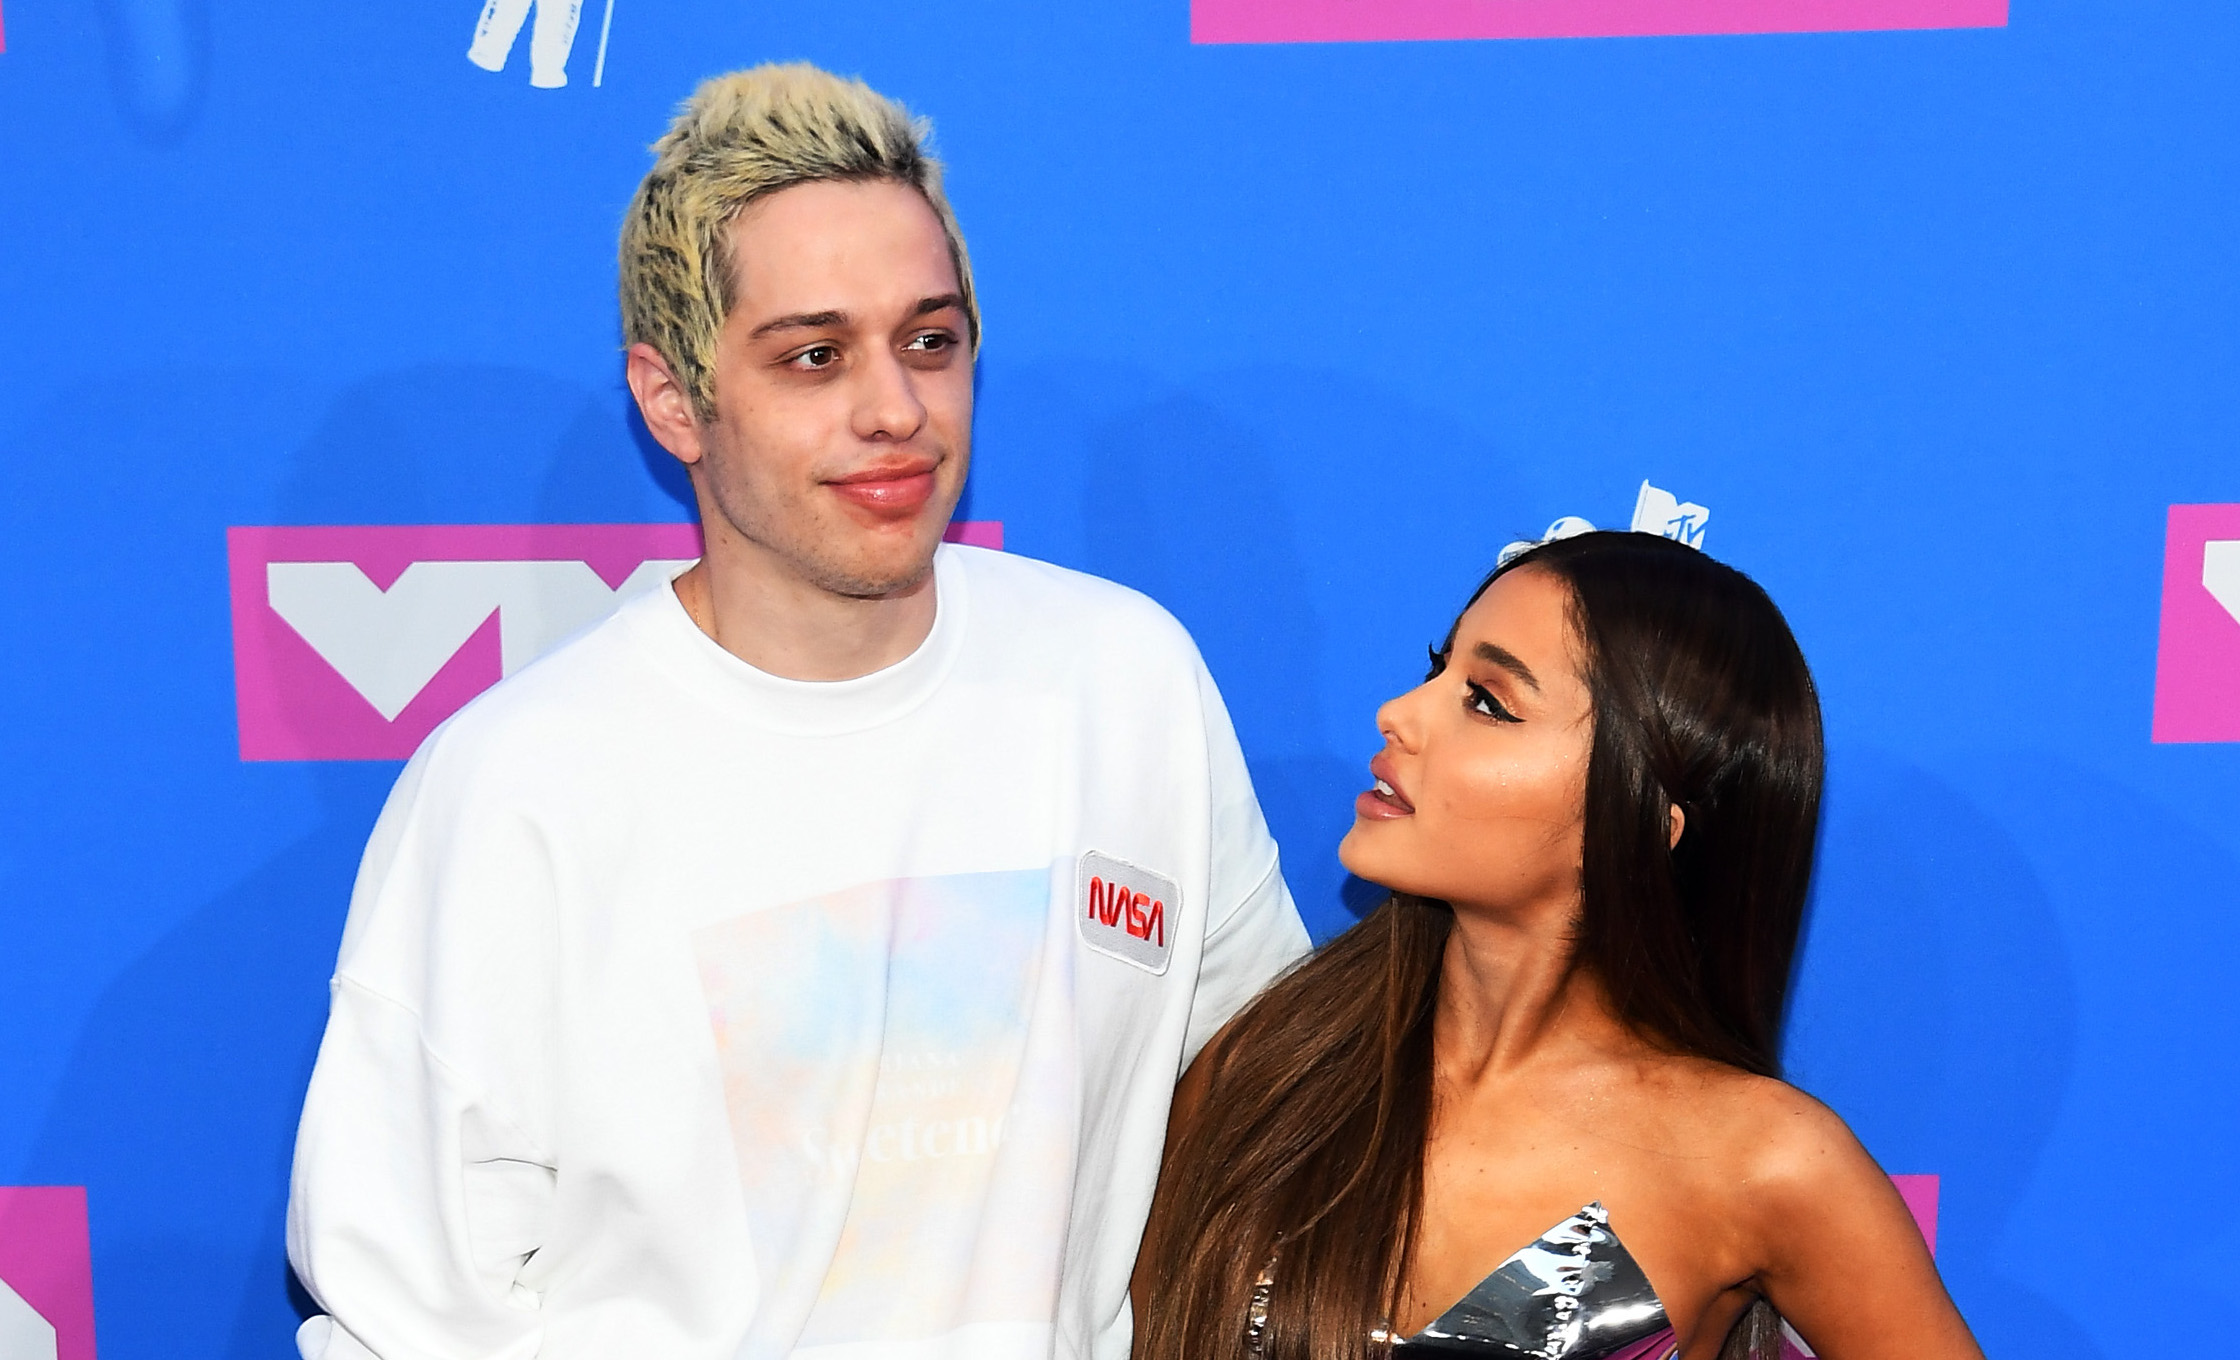 Ariana Grande flashes her unique engagement ring as she returns to stage  after wedding - Mirror Online